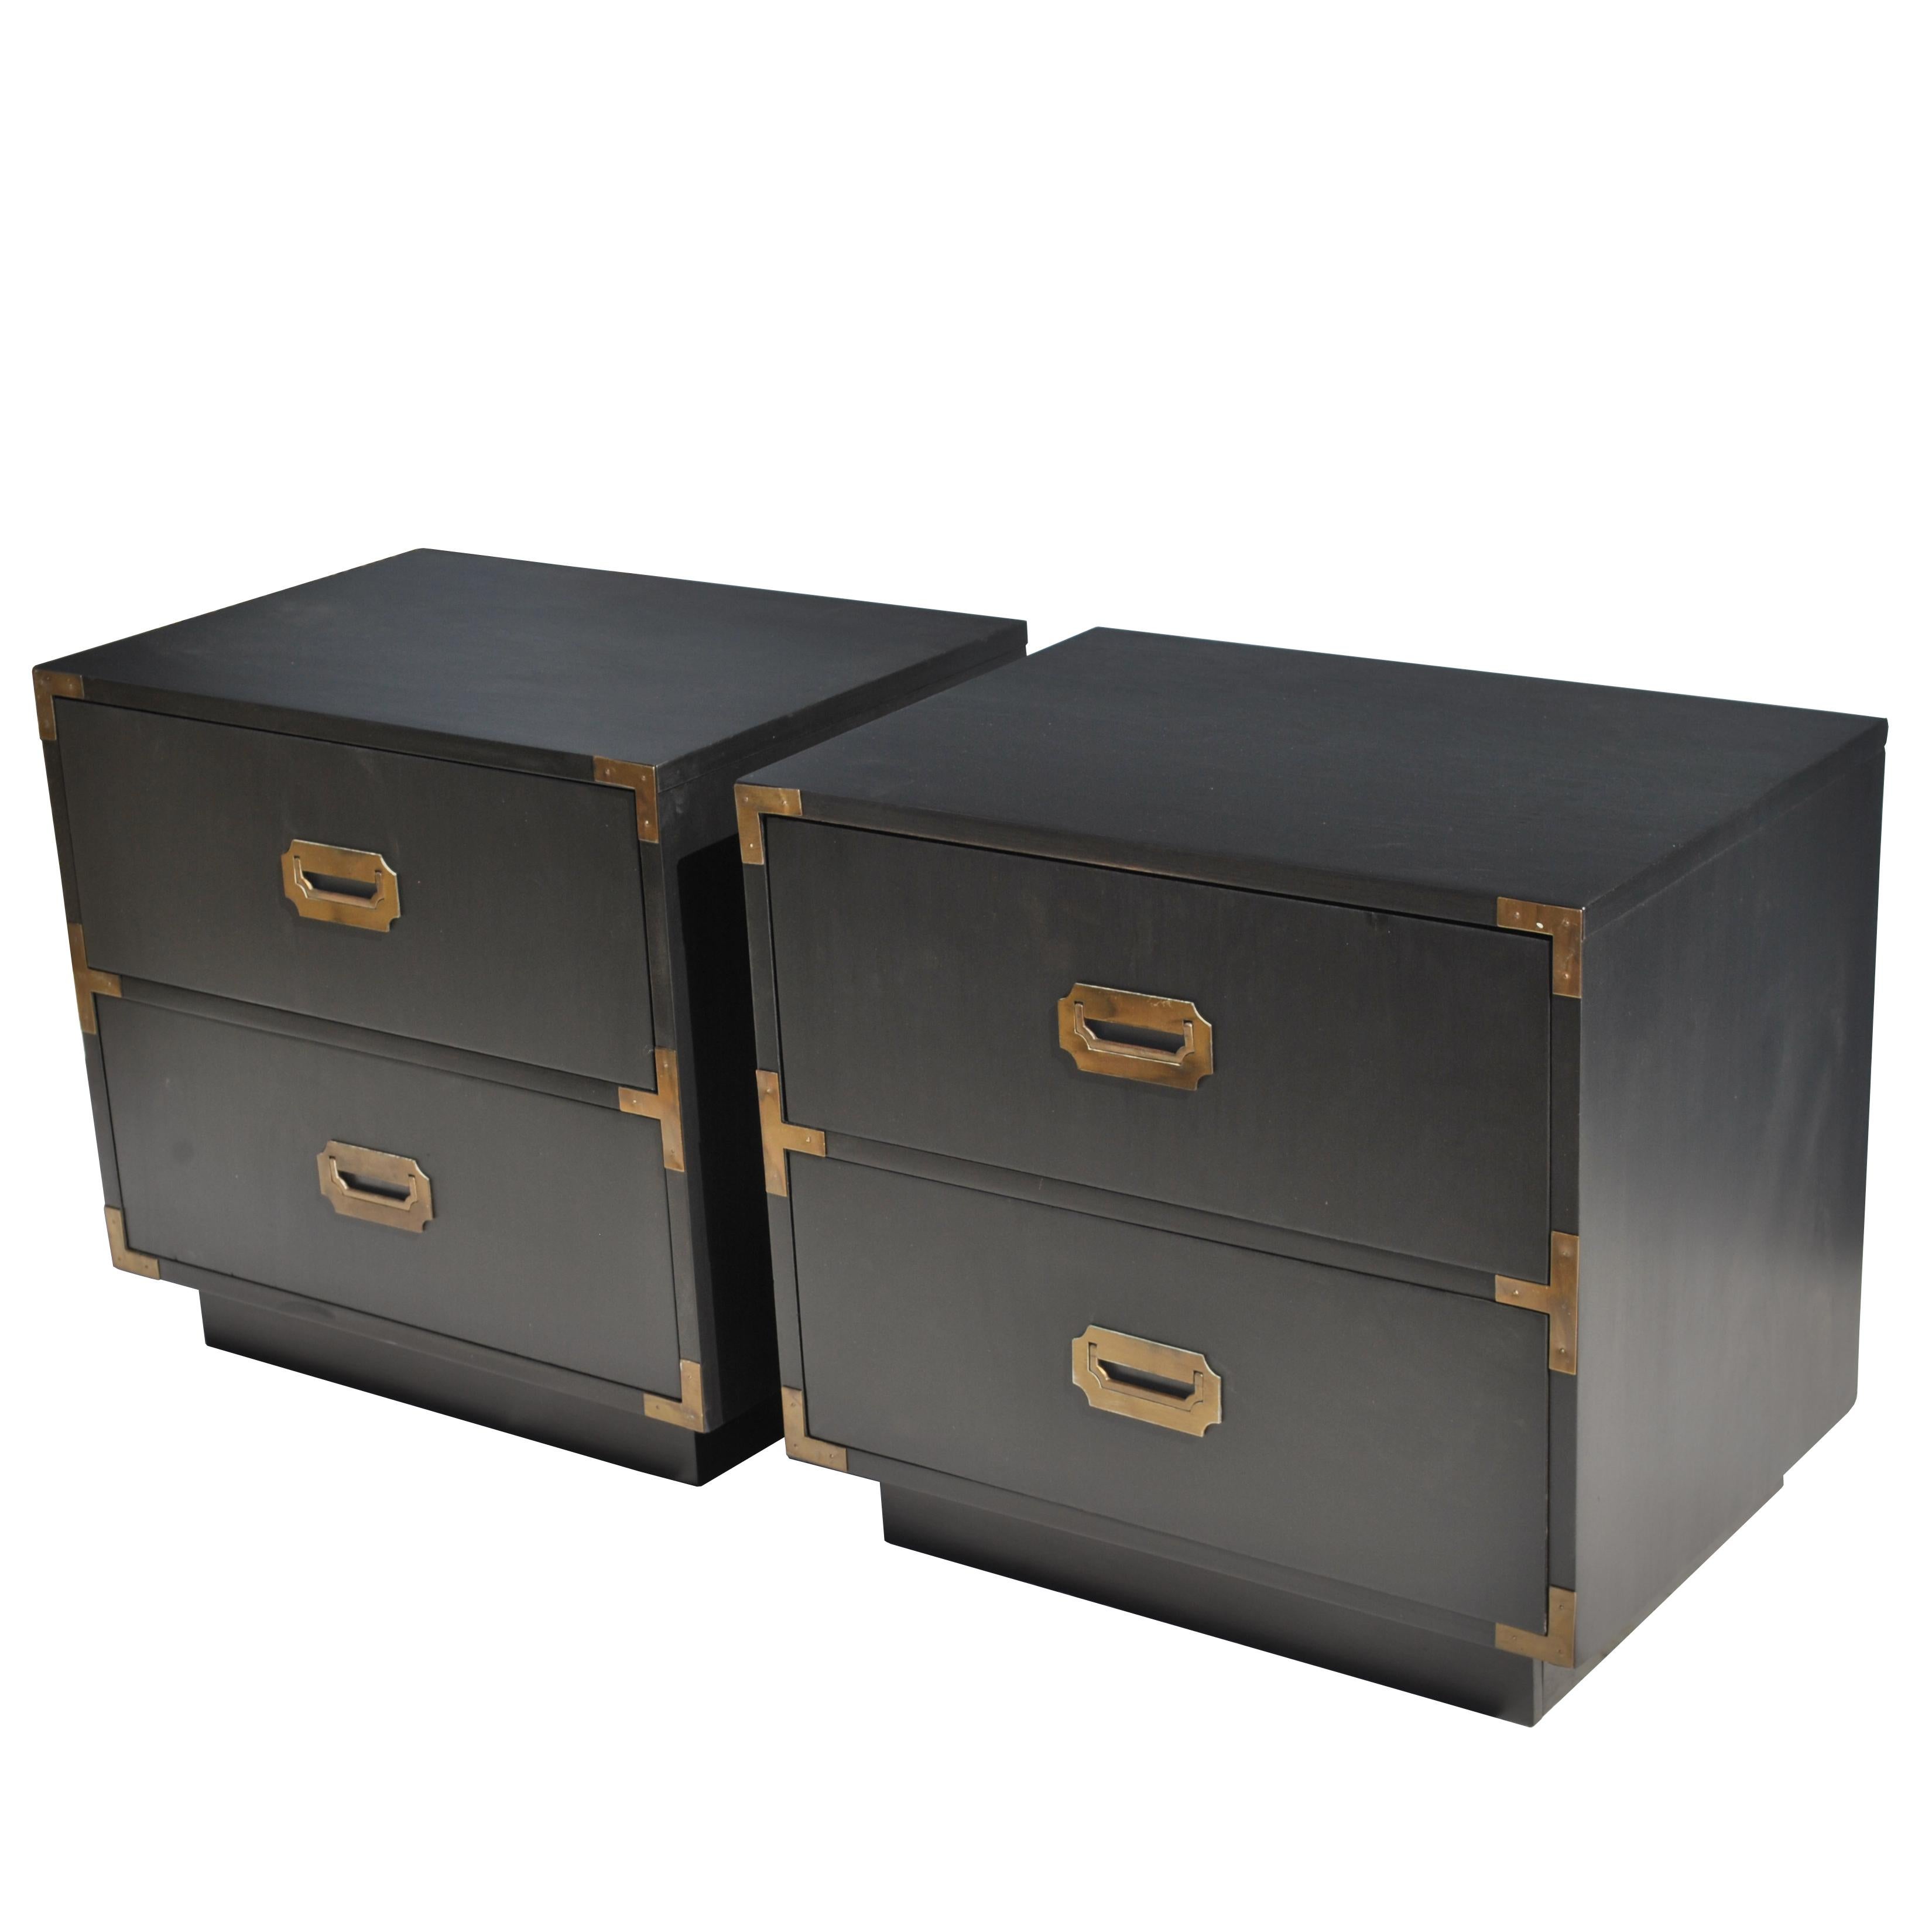 Pair of Midcentury Campaign Style Nightstands by Dixie